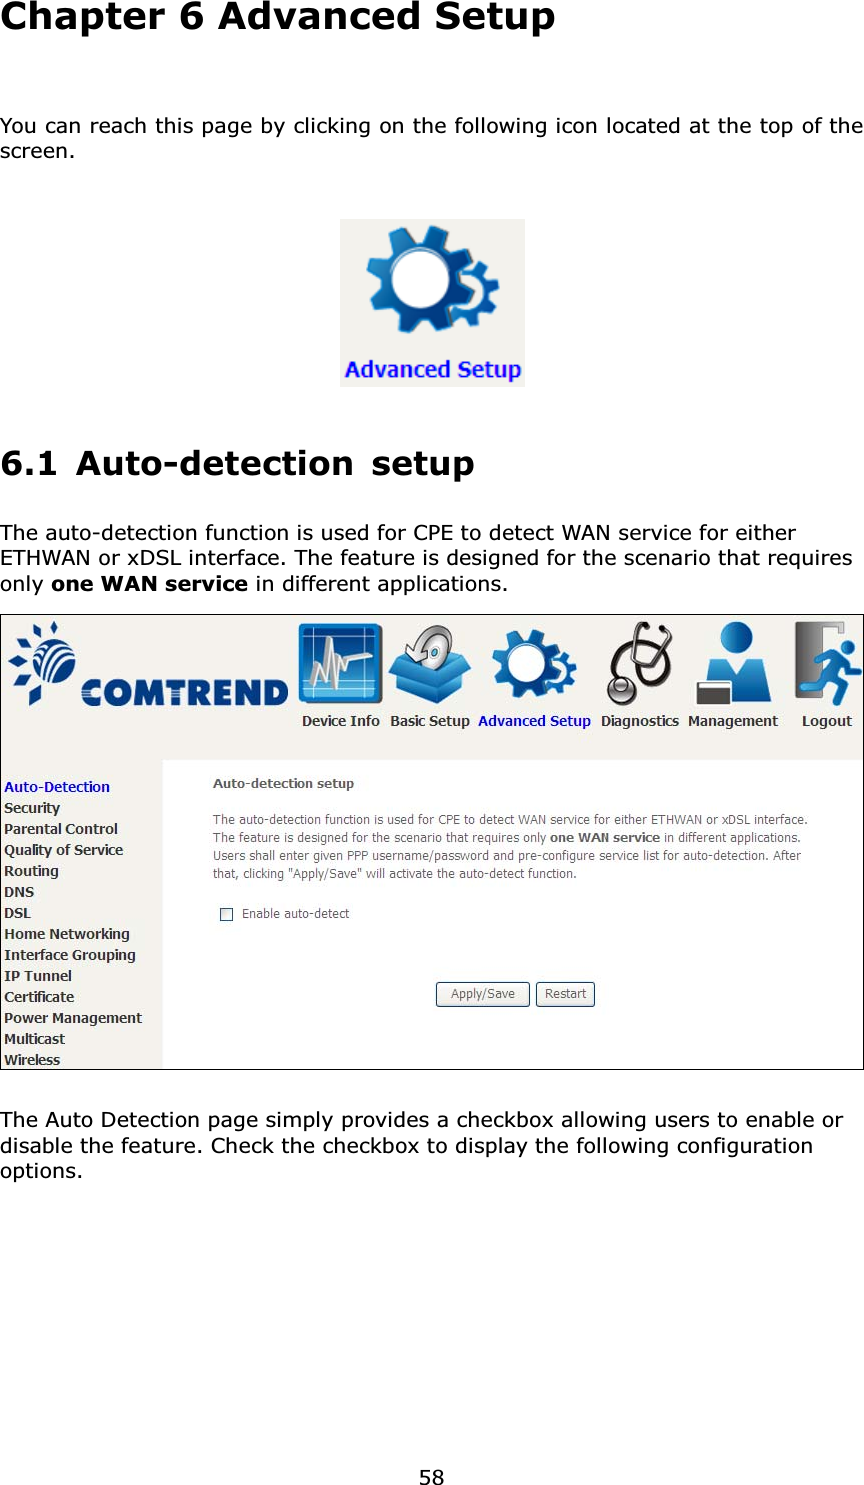 58Chapter 6 Advanced SetupYou can reach this page by clicking on the following icon located at the top of the screen.6.1 Auto-detection setupThe auto-detection function is used for CPE to detect WAN service for either ETHWAN or xDSL interface. The feature is designed for the scenario that requires only one WAN service in different applications. The Auto Detection page simply provides a checkbox allowing users to enable or disable the feature. Check the checkbox to display the following configuration options.